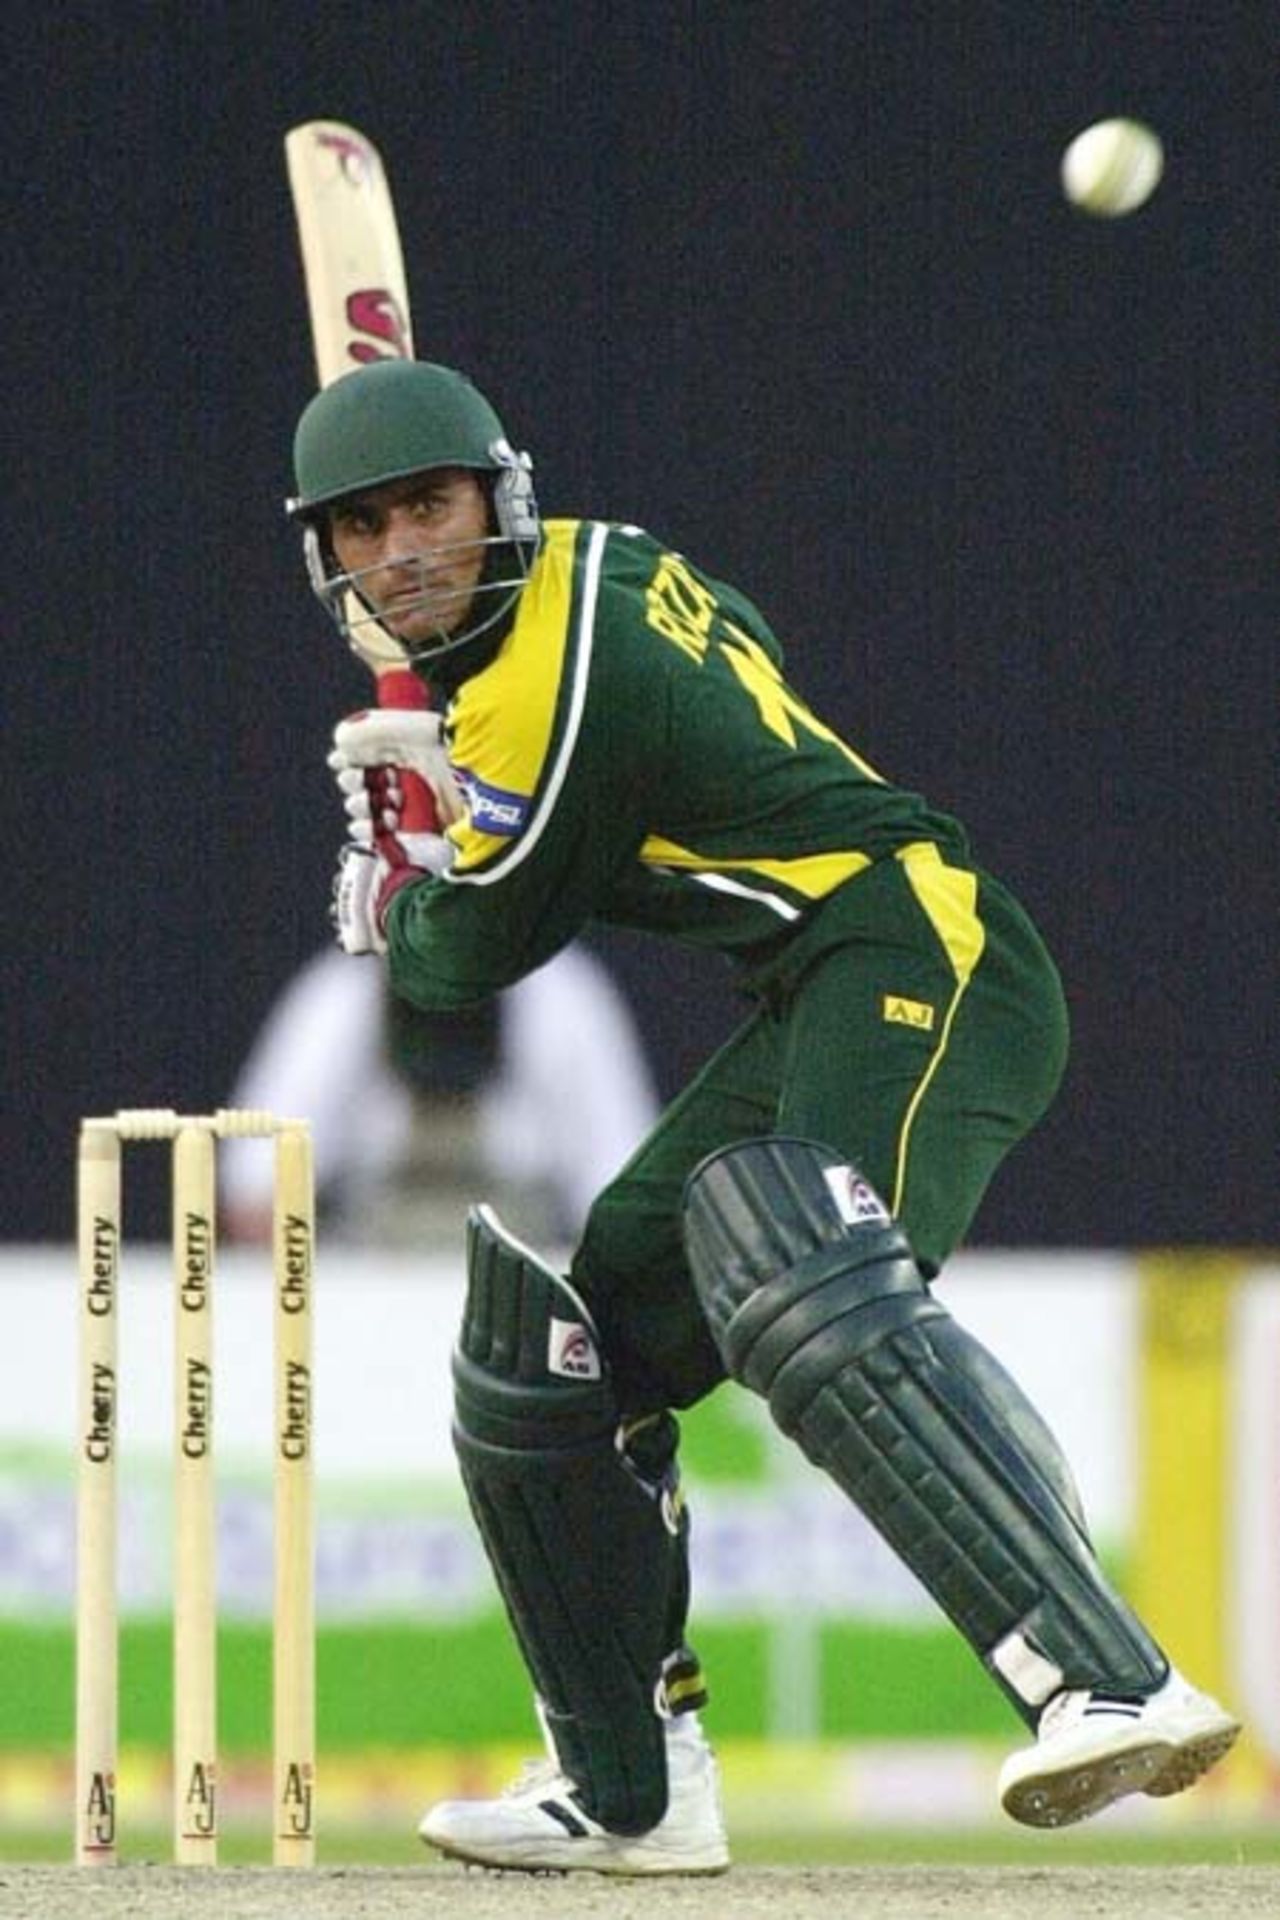 Pakistani all-rounder Abdul Razzaq concentrates on a ball to hit a six during his 76 runs inning in the first ODI against Zimbabwe in Sharjah, 03 April 2003.